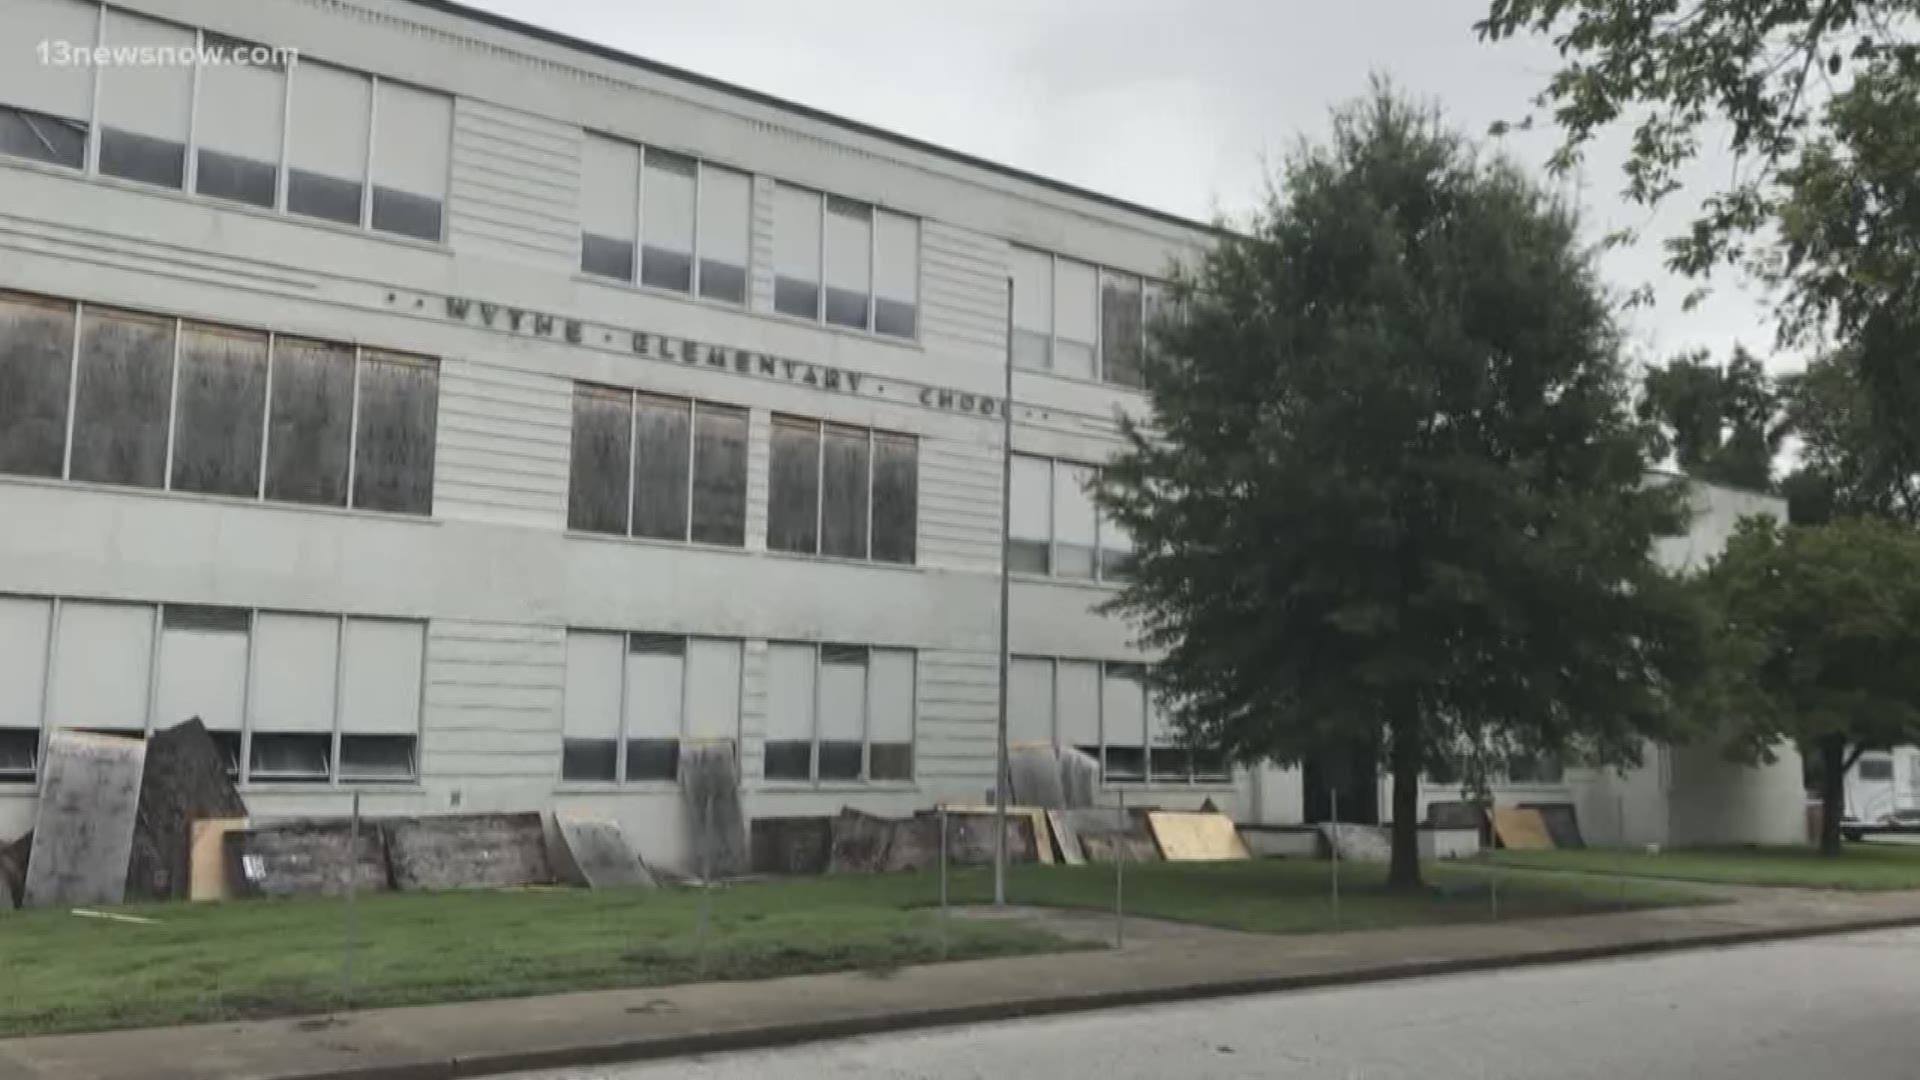 The City of Hampton finalized a deal for developers to turn an elementary school into apartments.